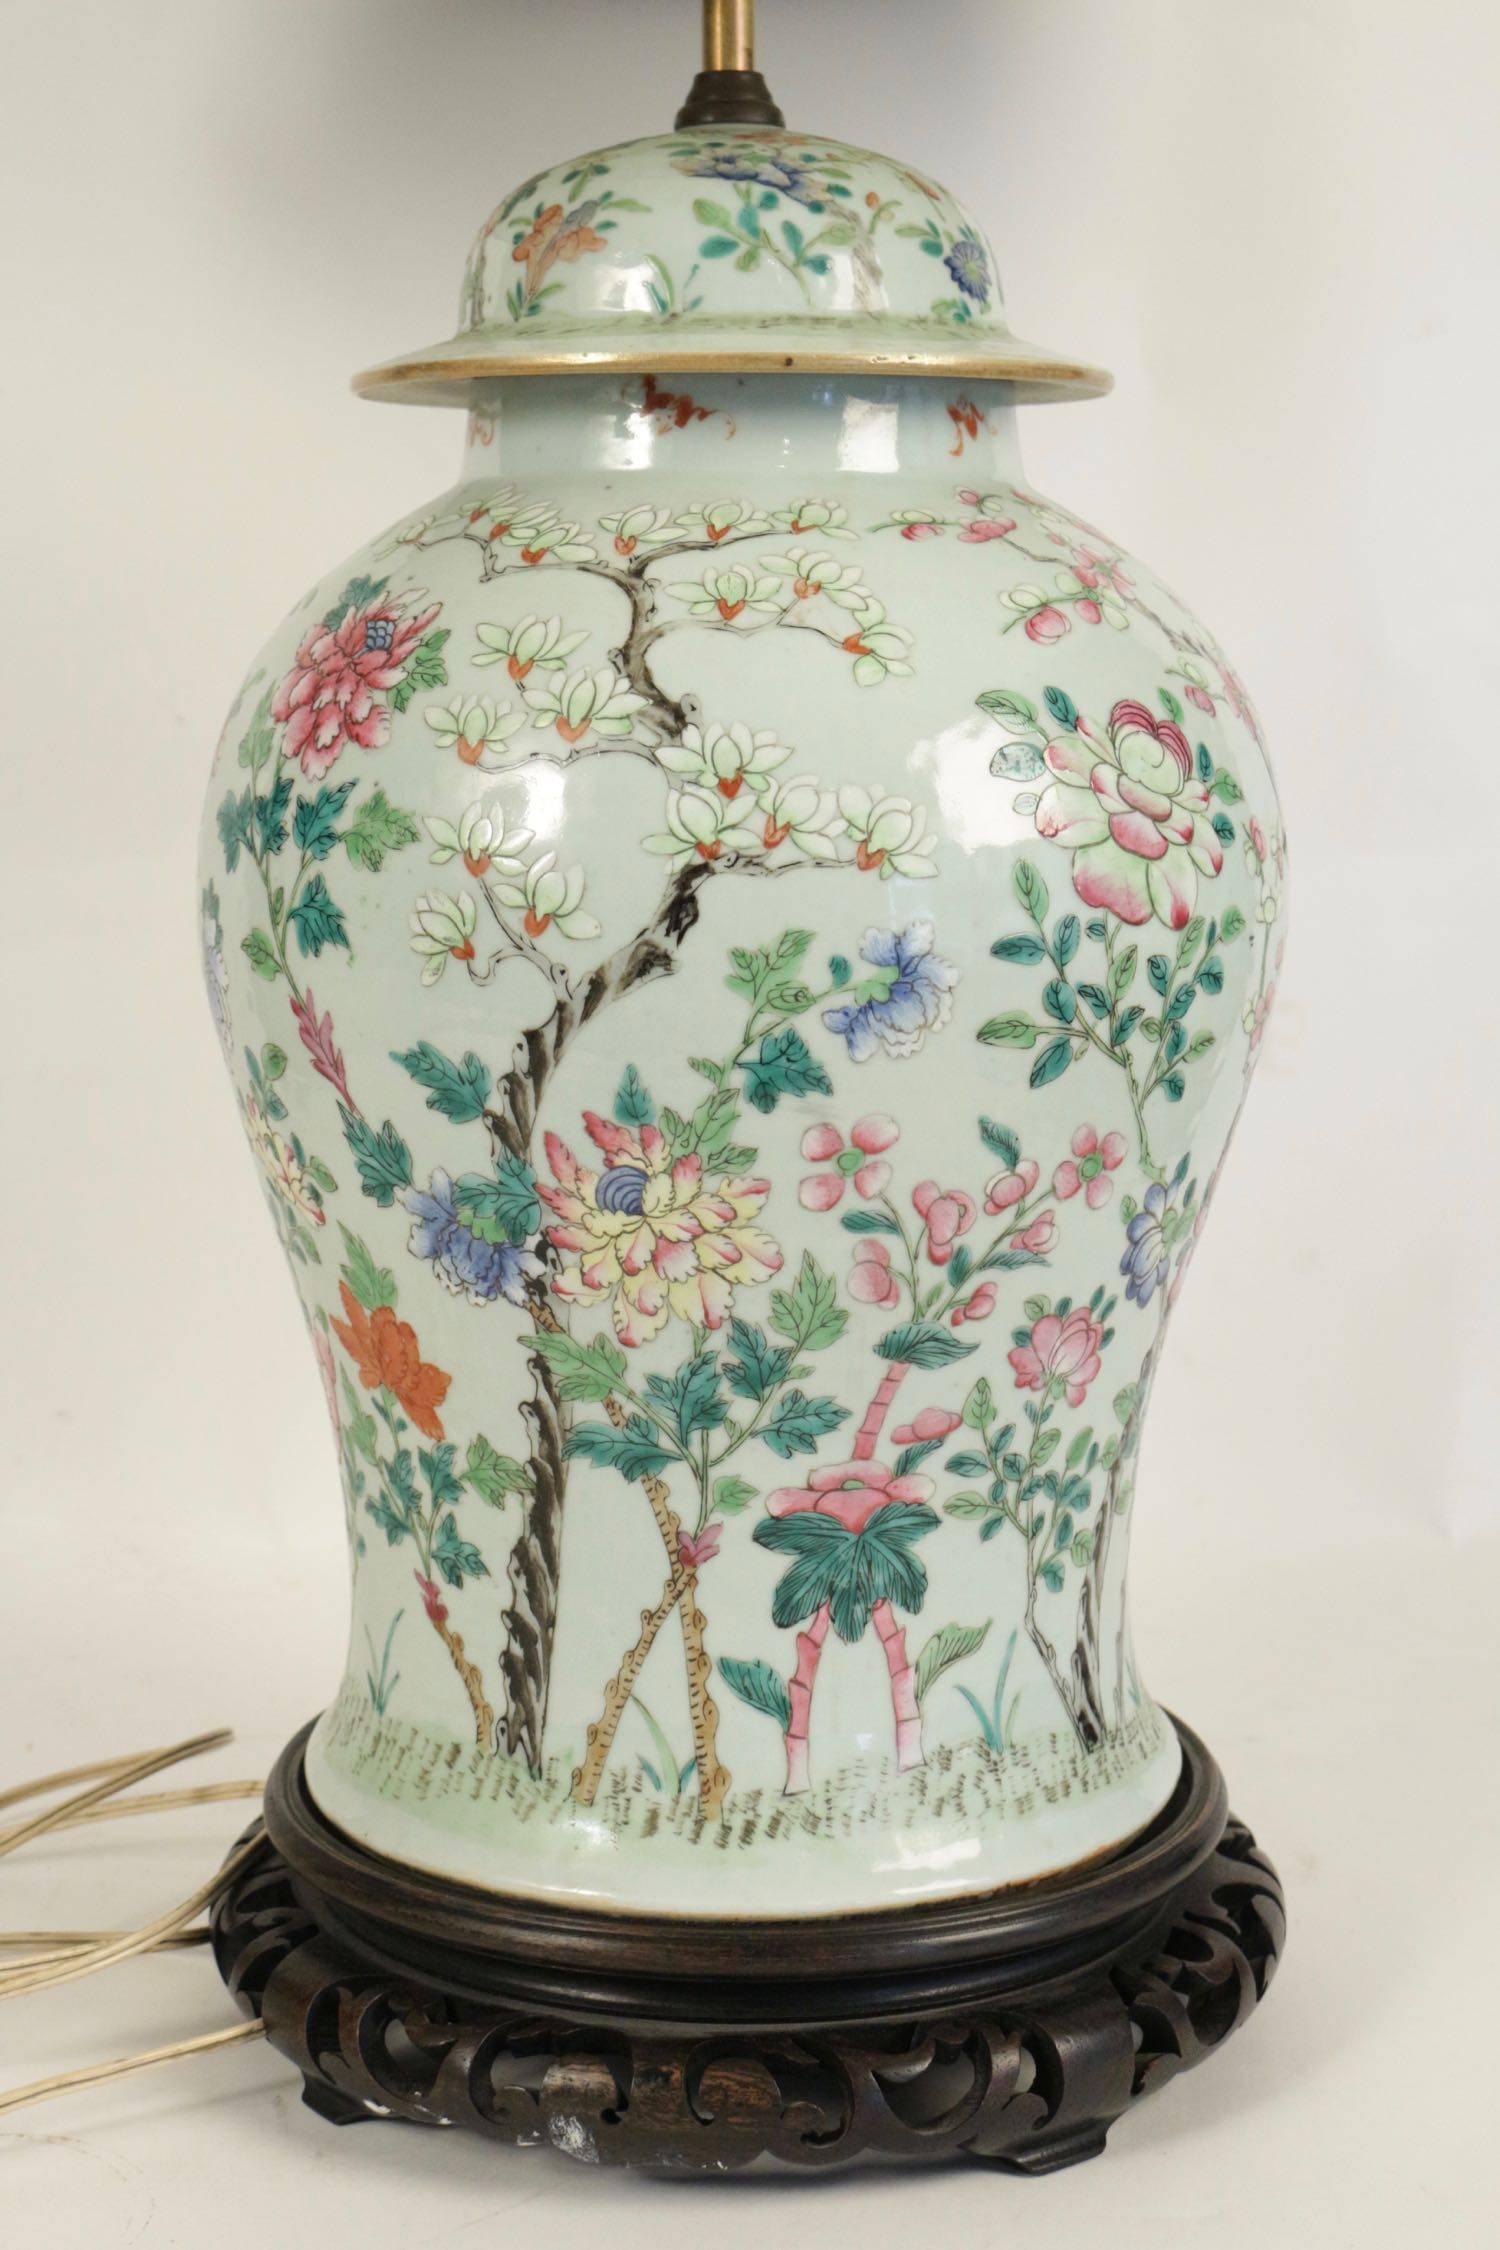 19th Century Important Chinese Porcelain Lamp, circa 1890-1900, China, Antique